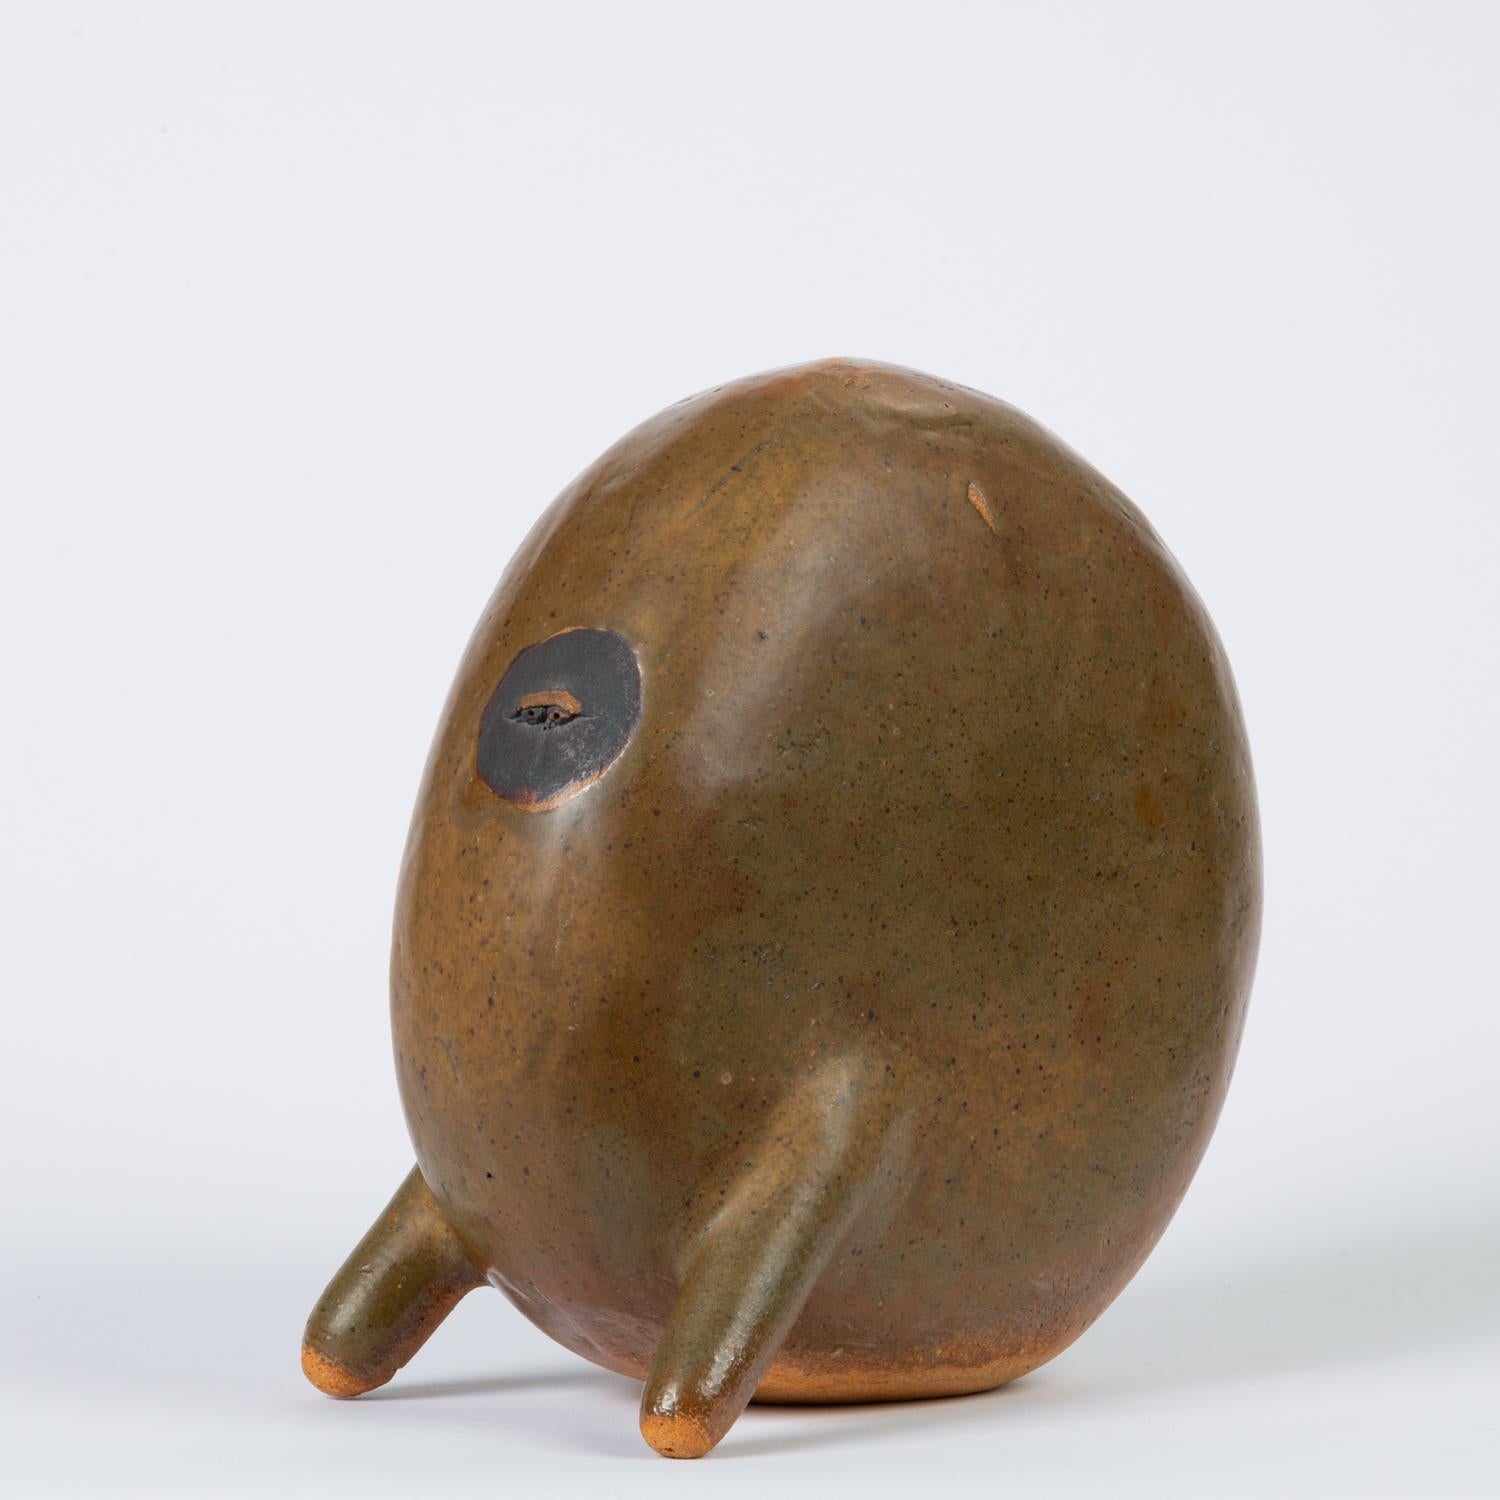 A fanciful example of midcentury Studio Pottery, this piece is a bipedal ovoid creature with a heavy brown. The Minimalist composition has a large body with an irregular glaze finish. A “face” is demarcated by a small circle of darker glaze, in